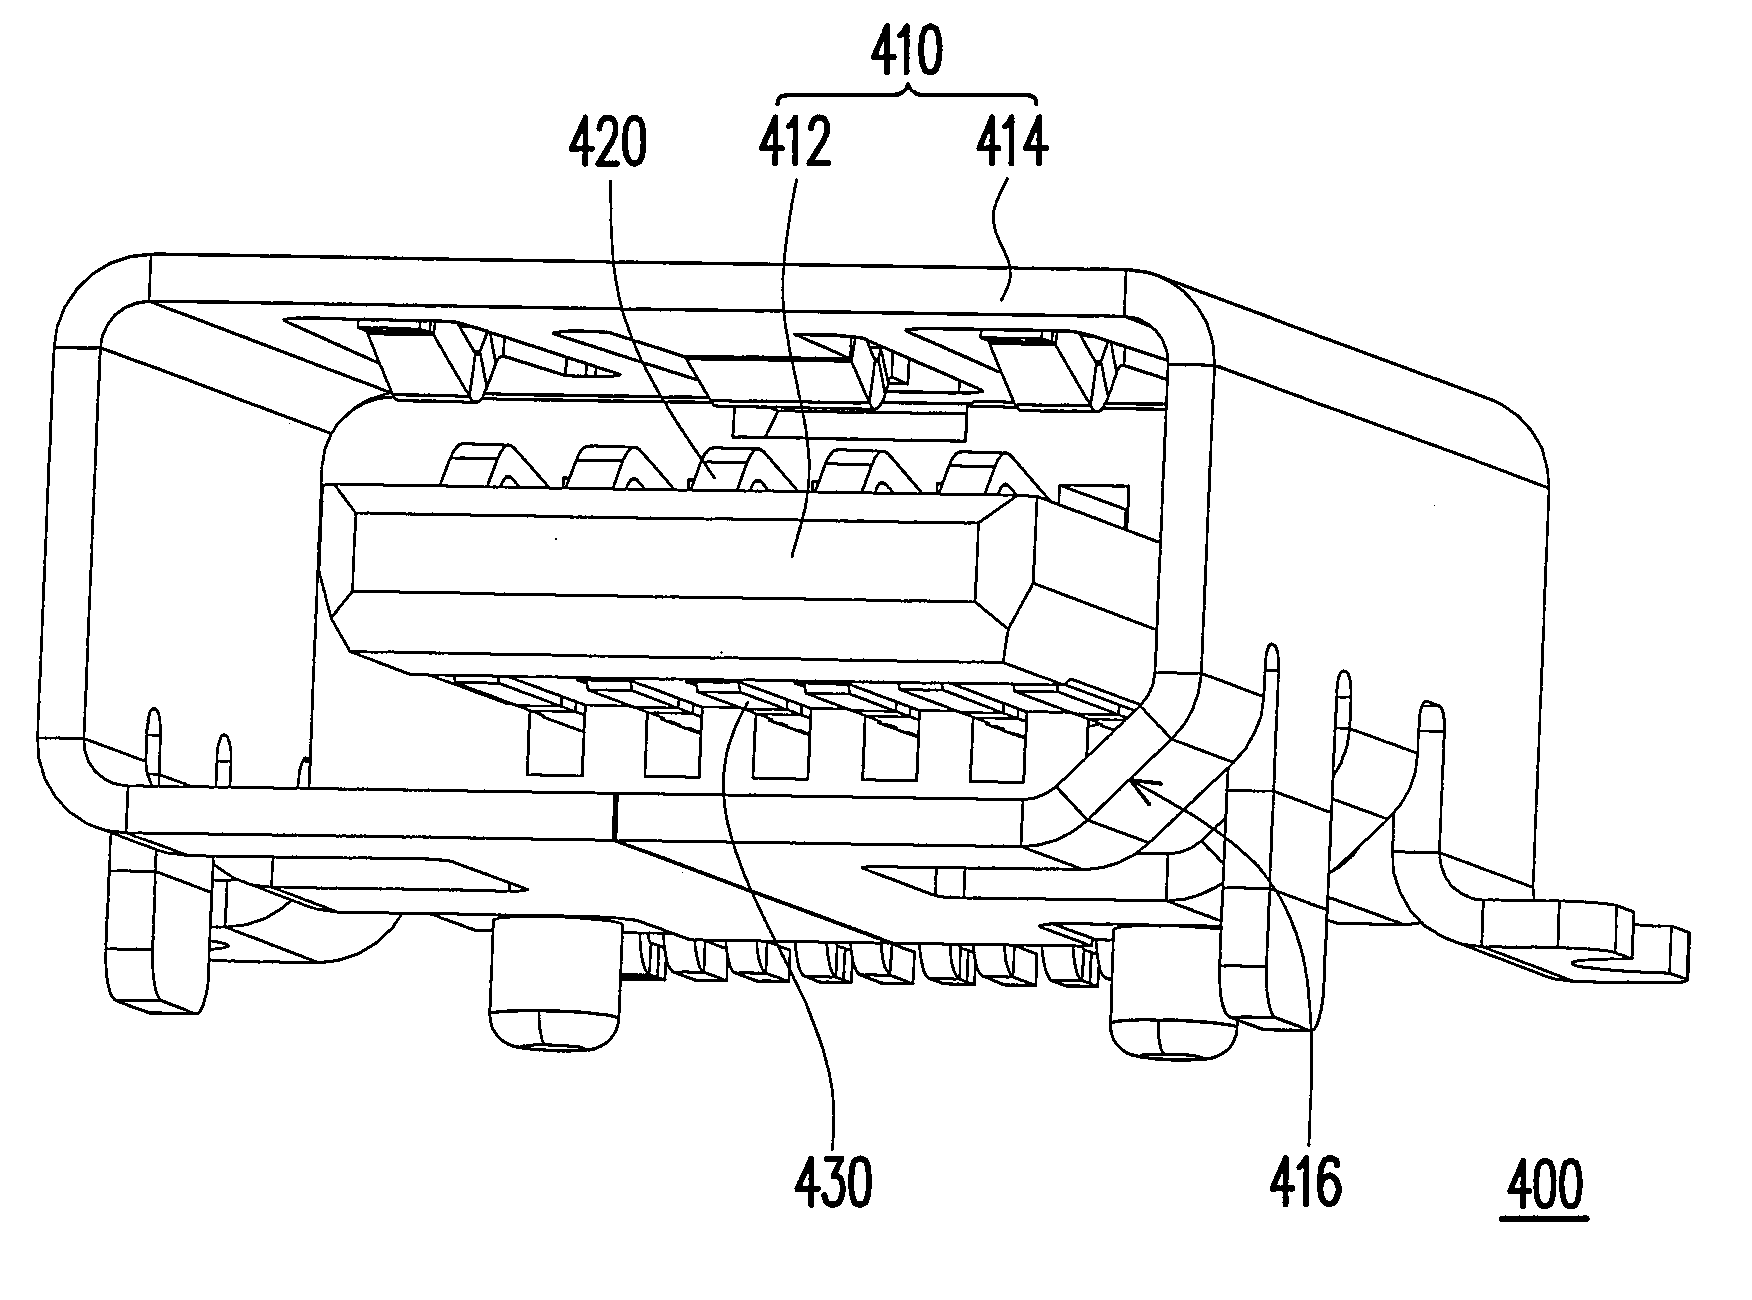 Compatible connector for first and second joints having different pin quantities